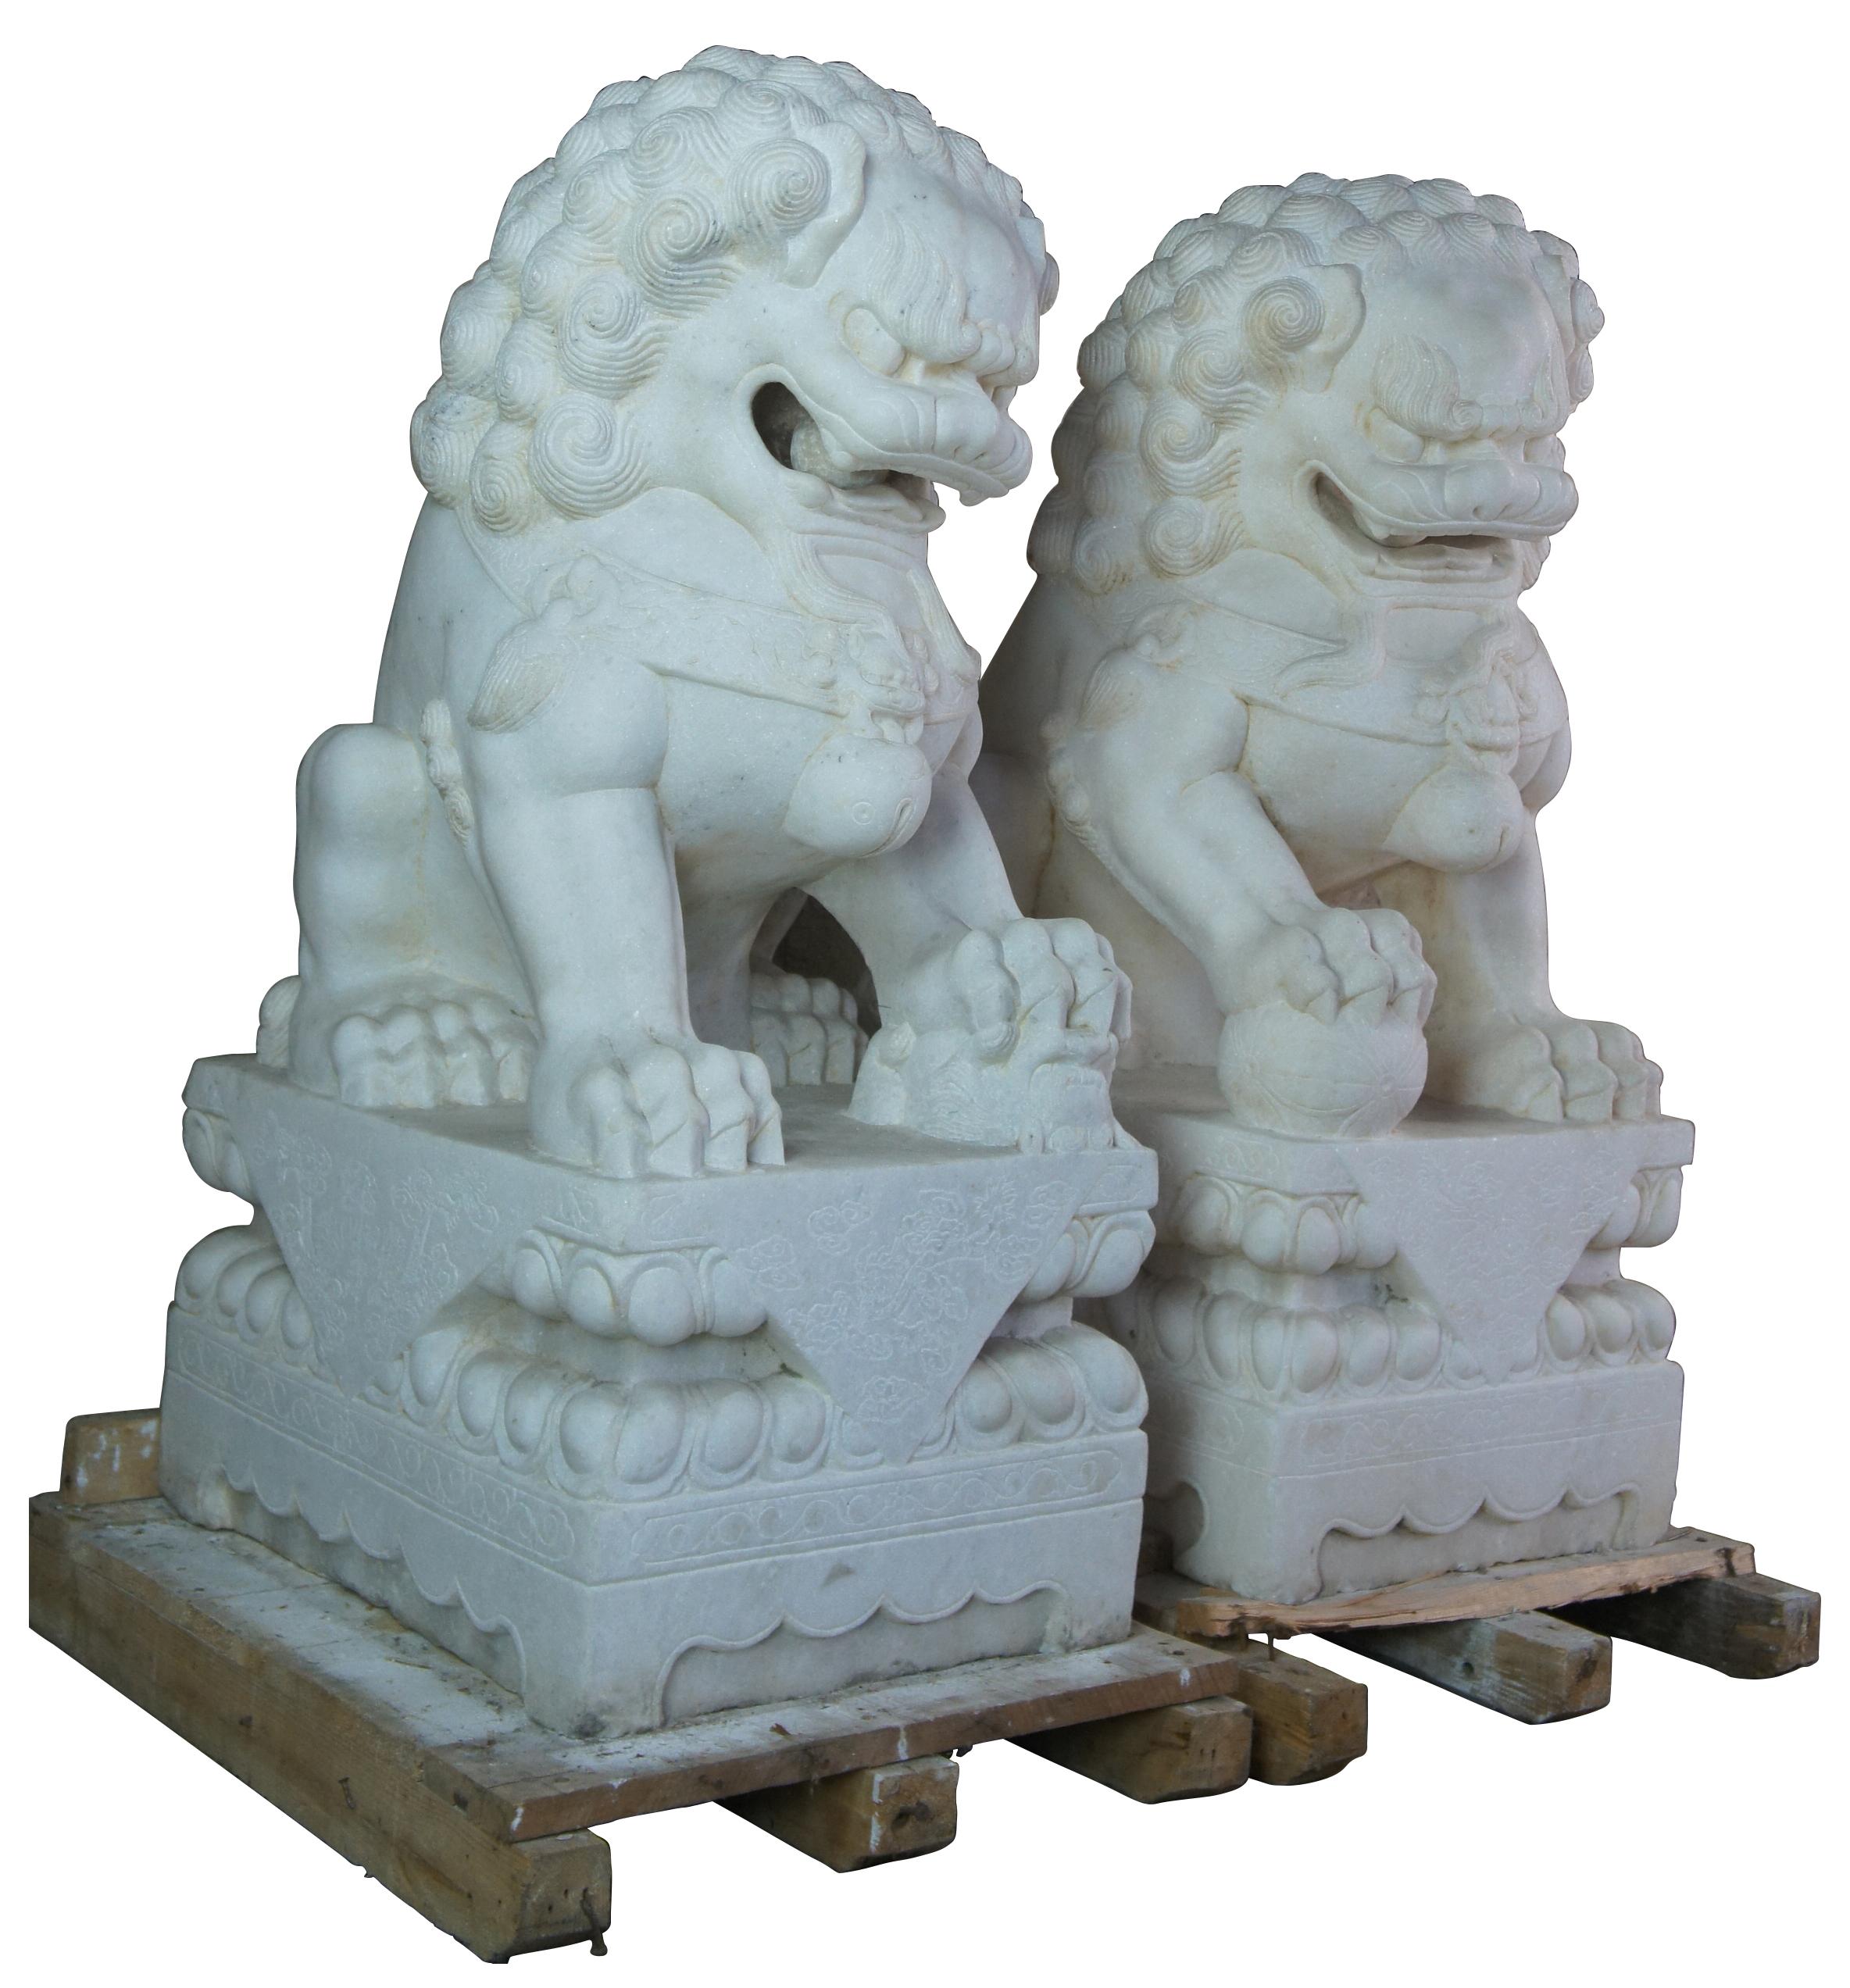 Two monumental antique Chines Chinese foo dogs, circa last quarter 19th century. Made of white marble featuring meticulously carved detail.

Provenance; Private Collection where acquired by the previous owner from an important New York estate in